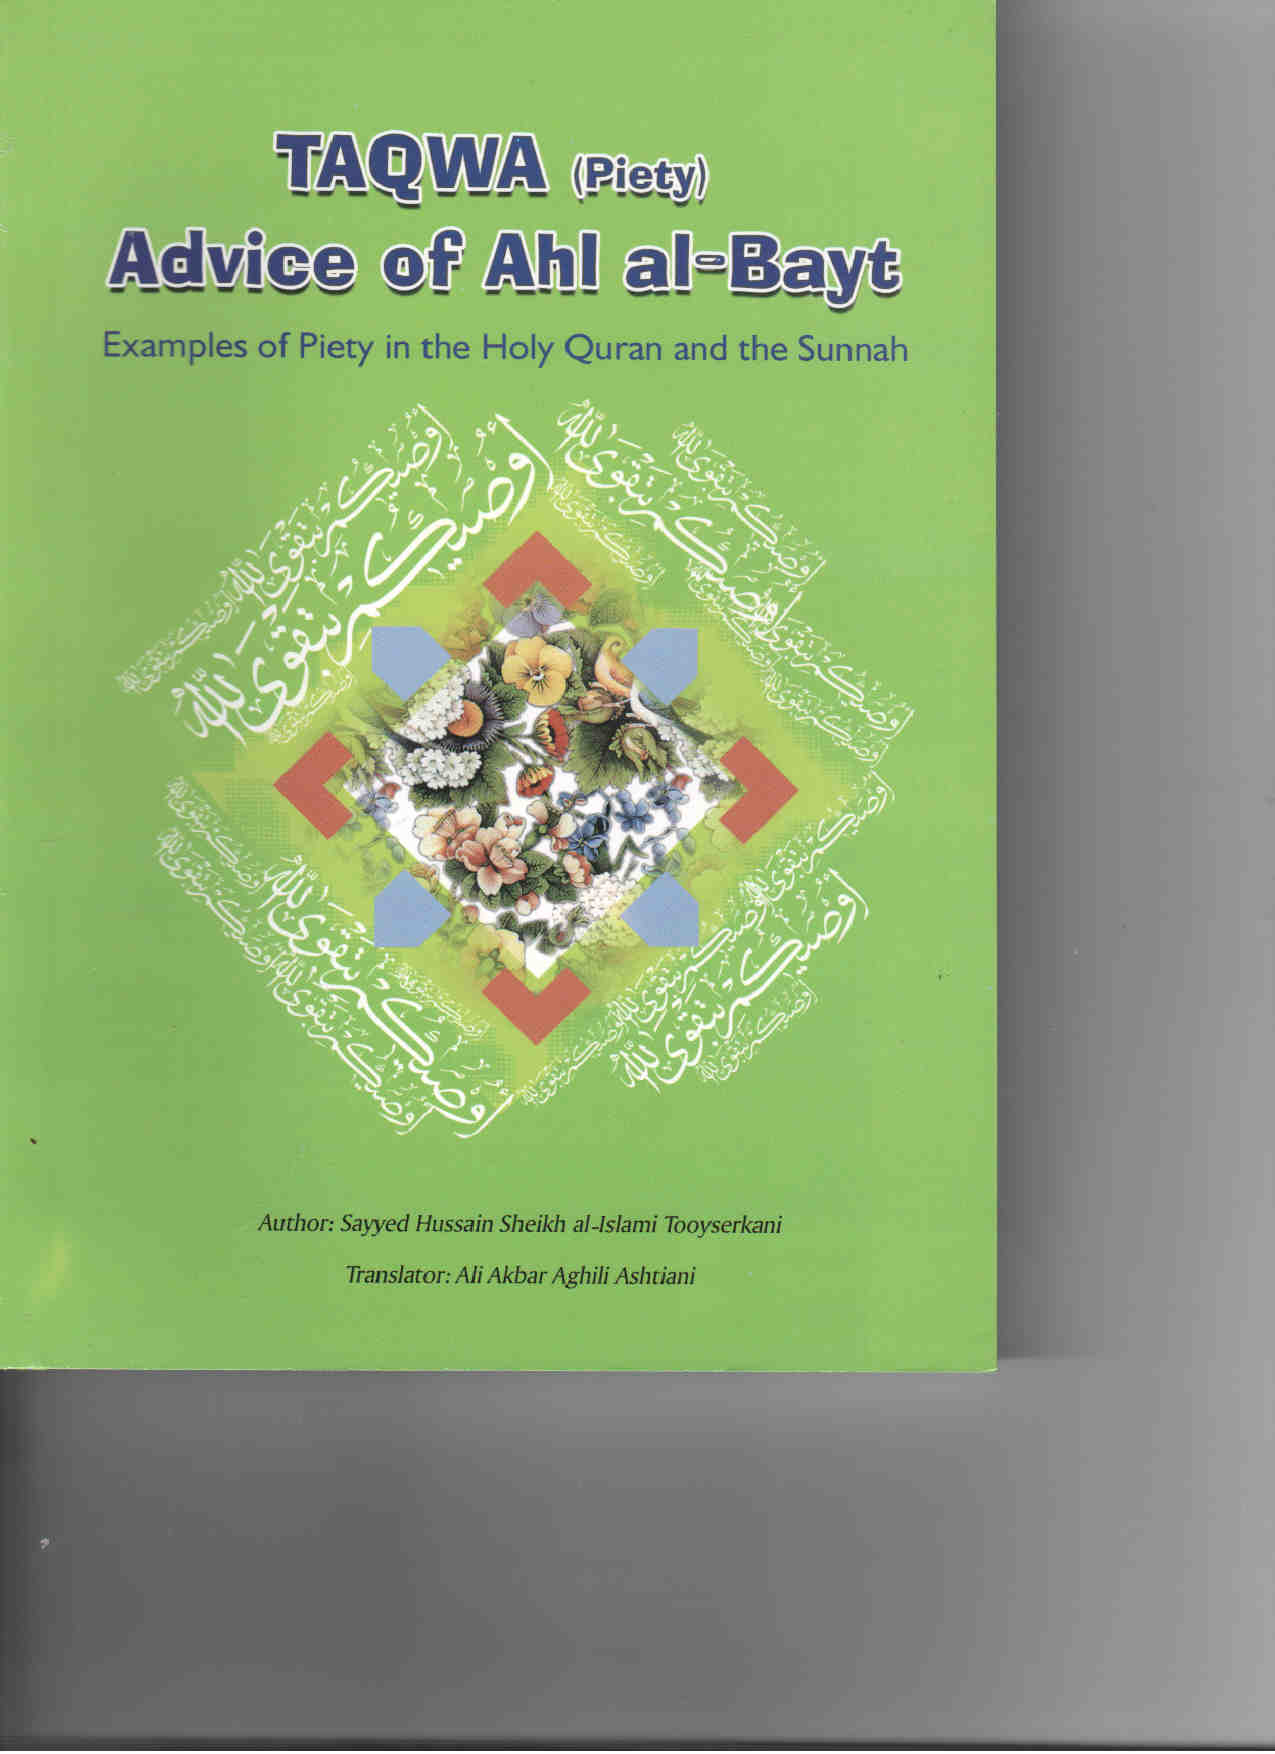 Taqwa (Piety) Advice of Ahlal-Bayt - Examples of Piety in the Holy Quran and the Sunnah